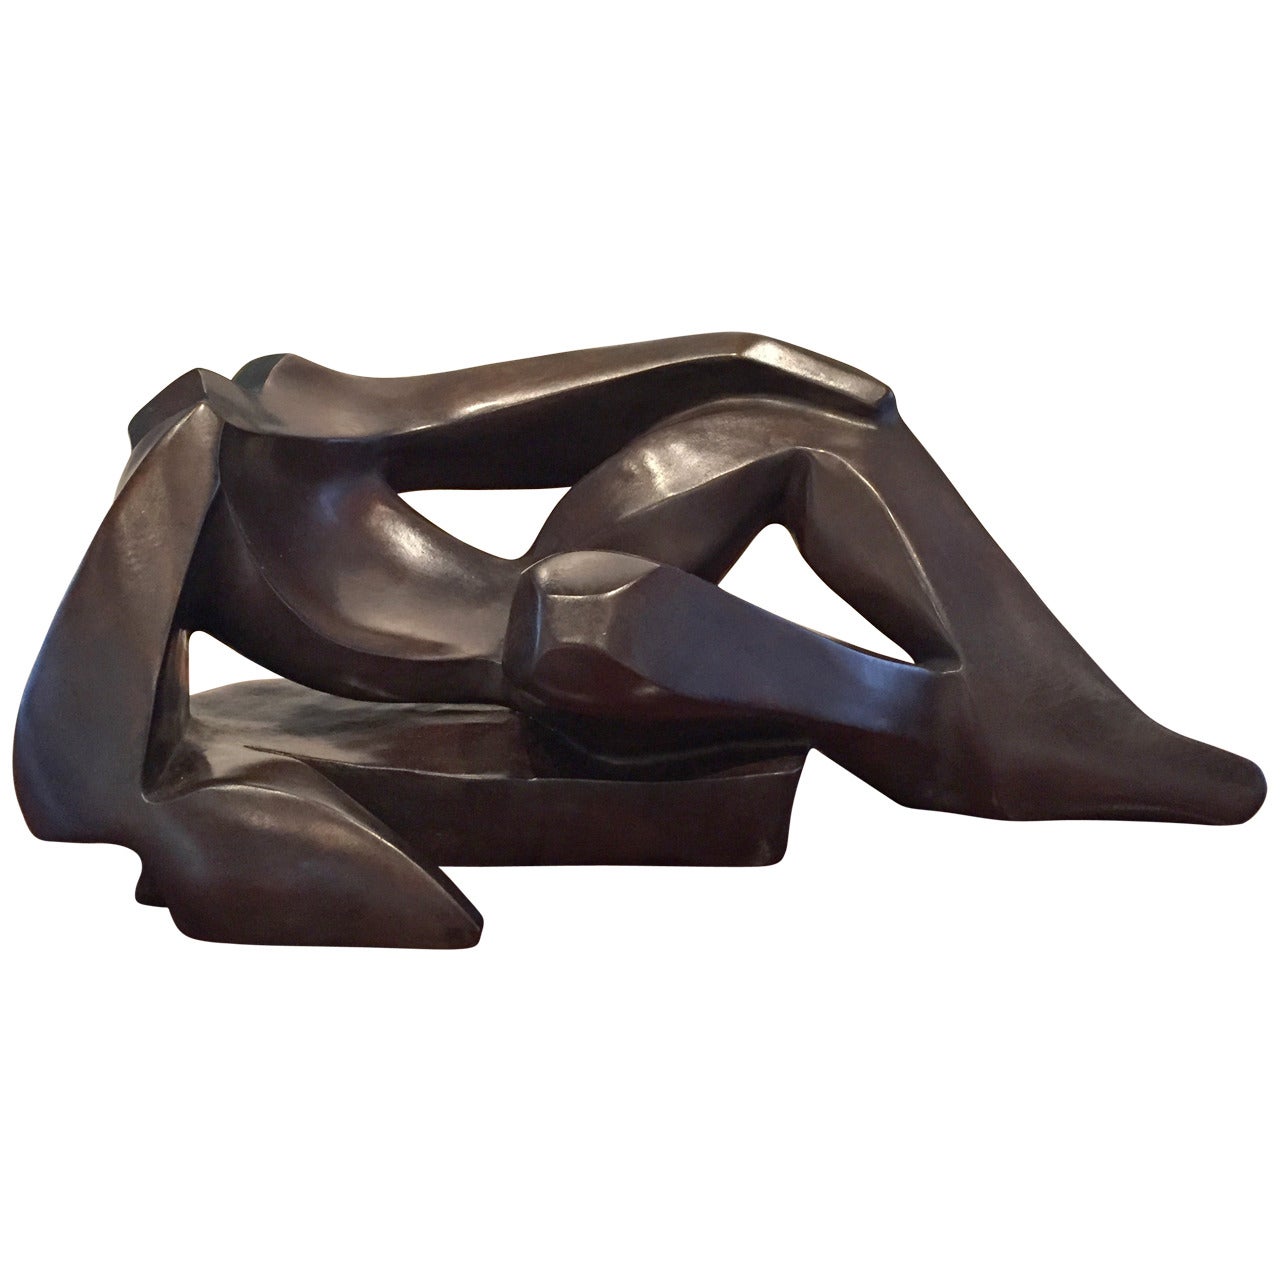 Bronze Reclining Male Figure by Pascale Gallais